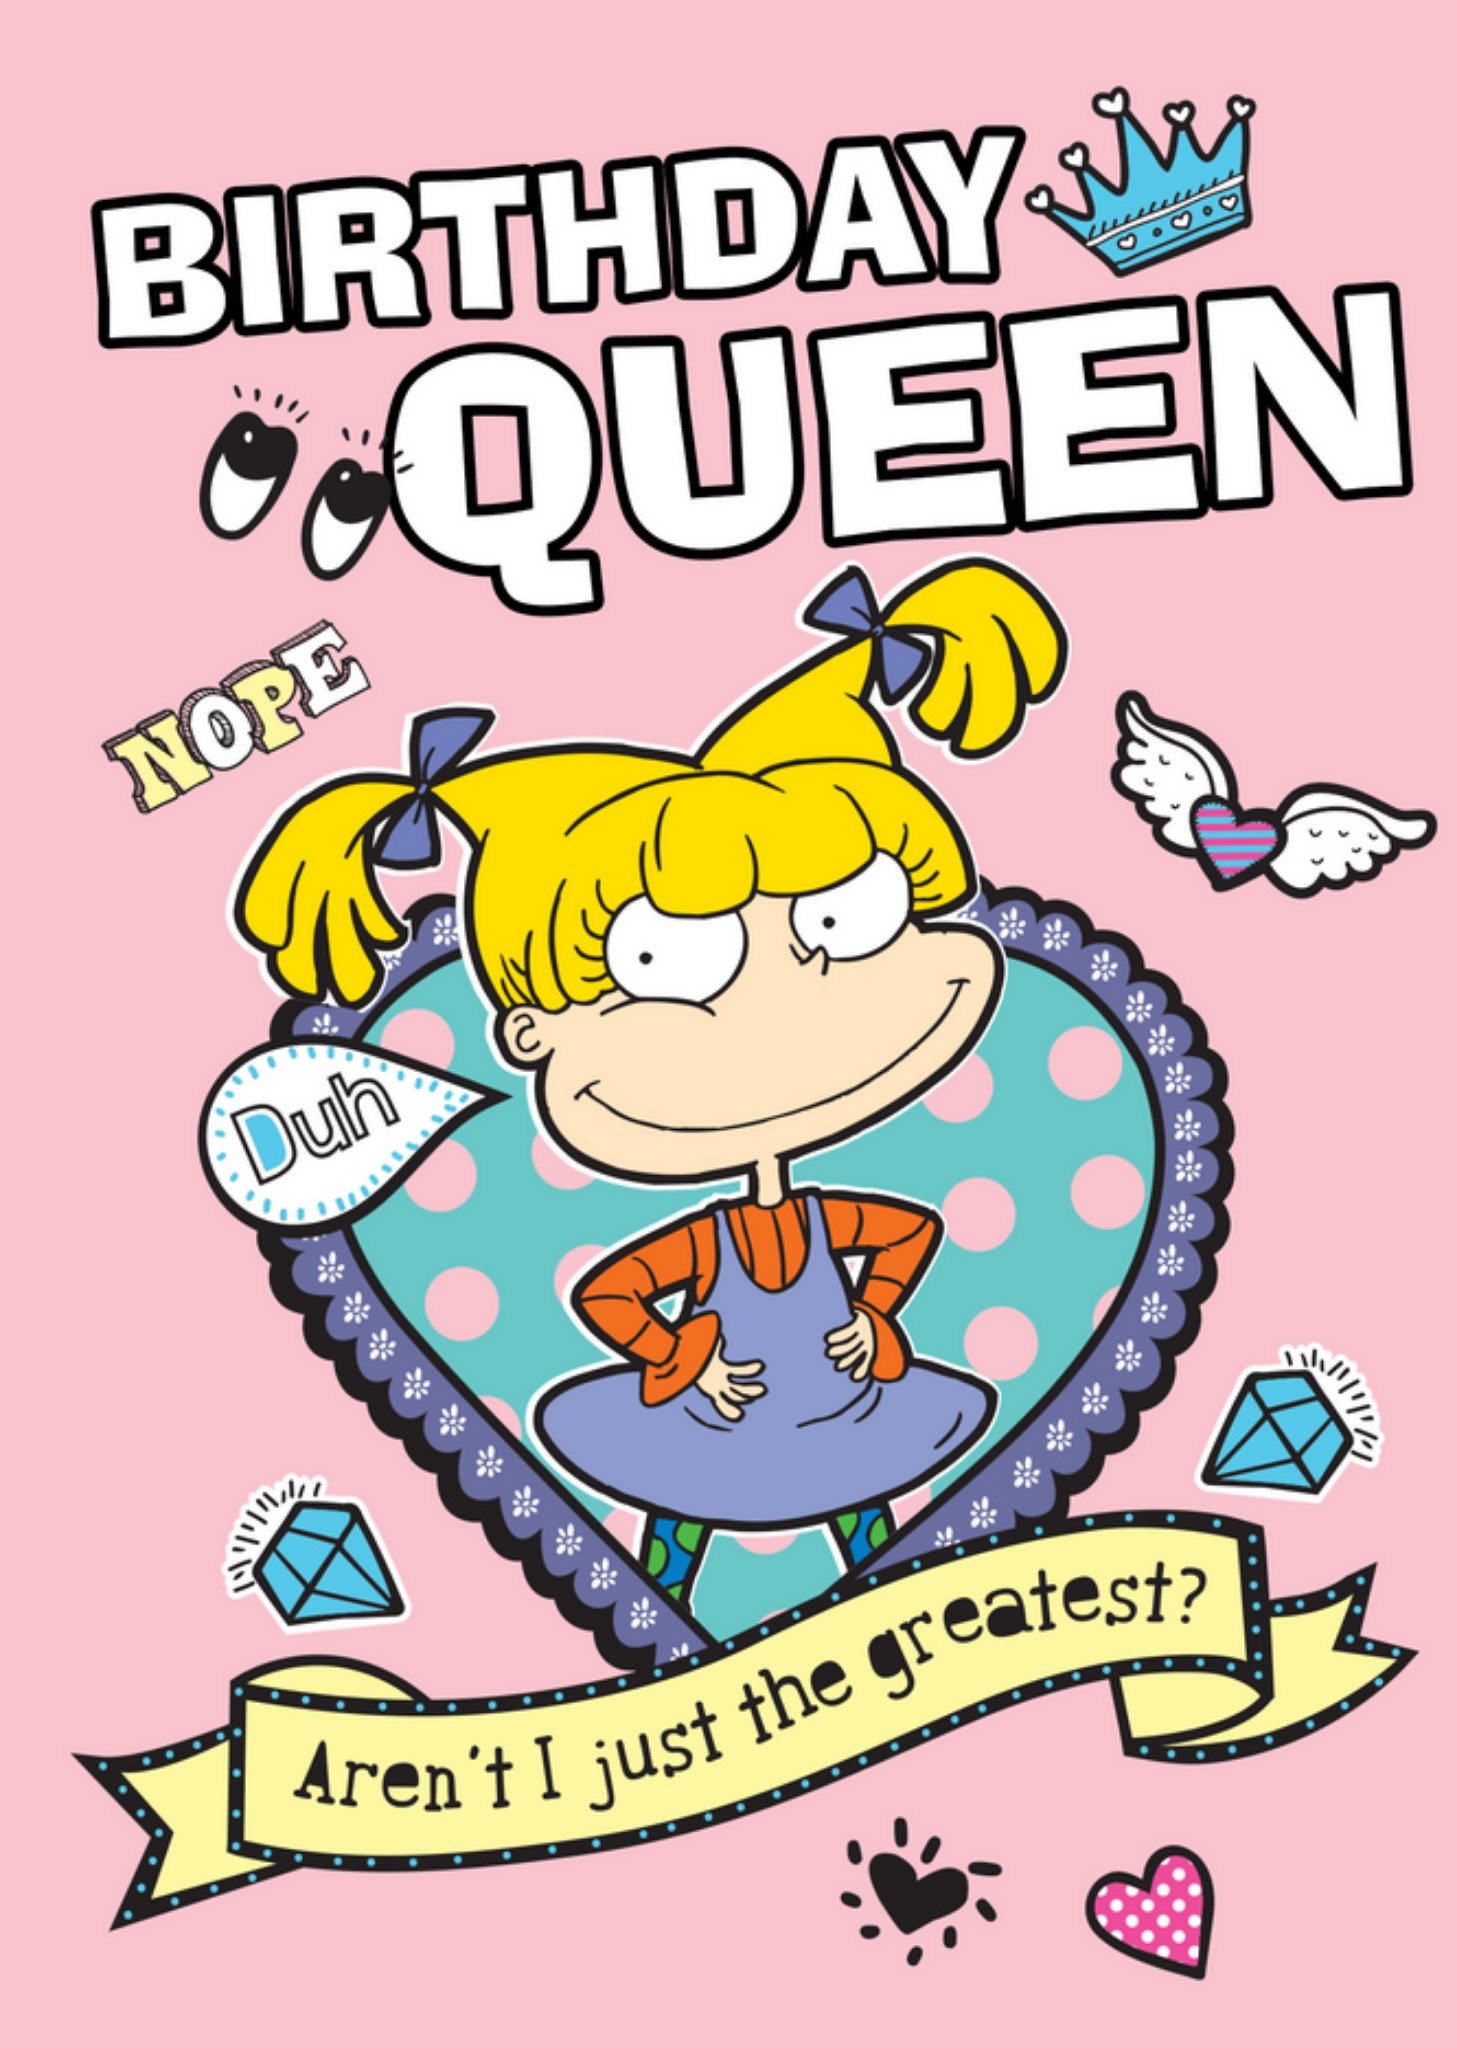 Nickelodeon Rugrats Angelica Birthday Queen Card, Large